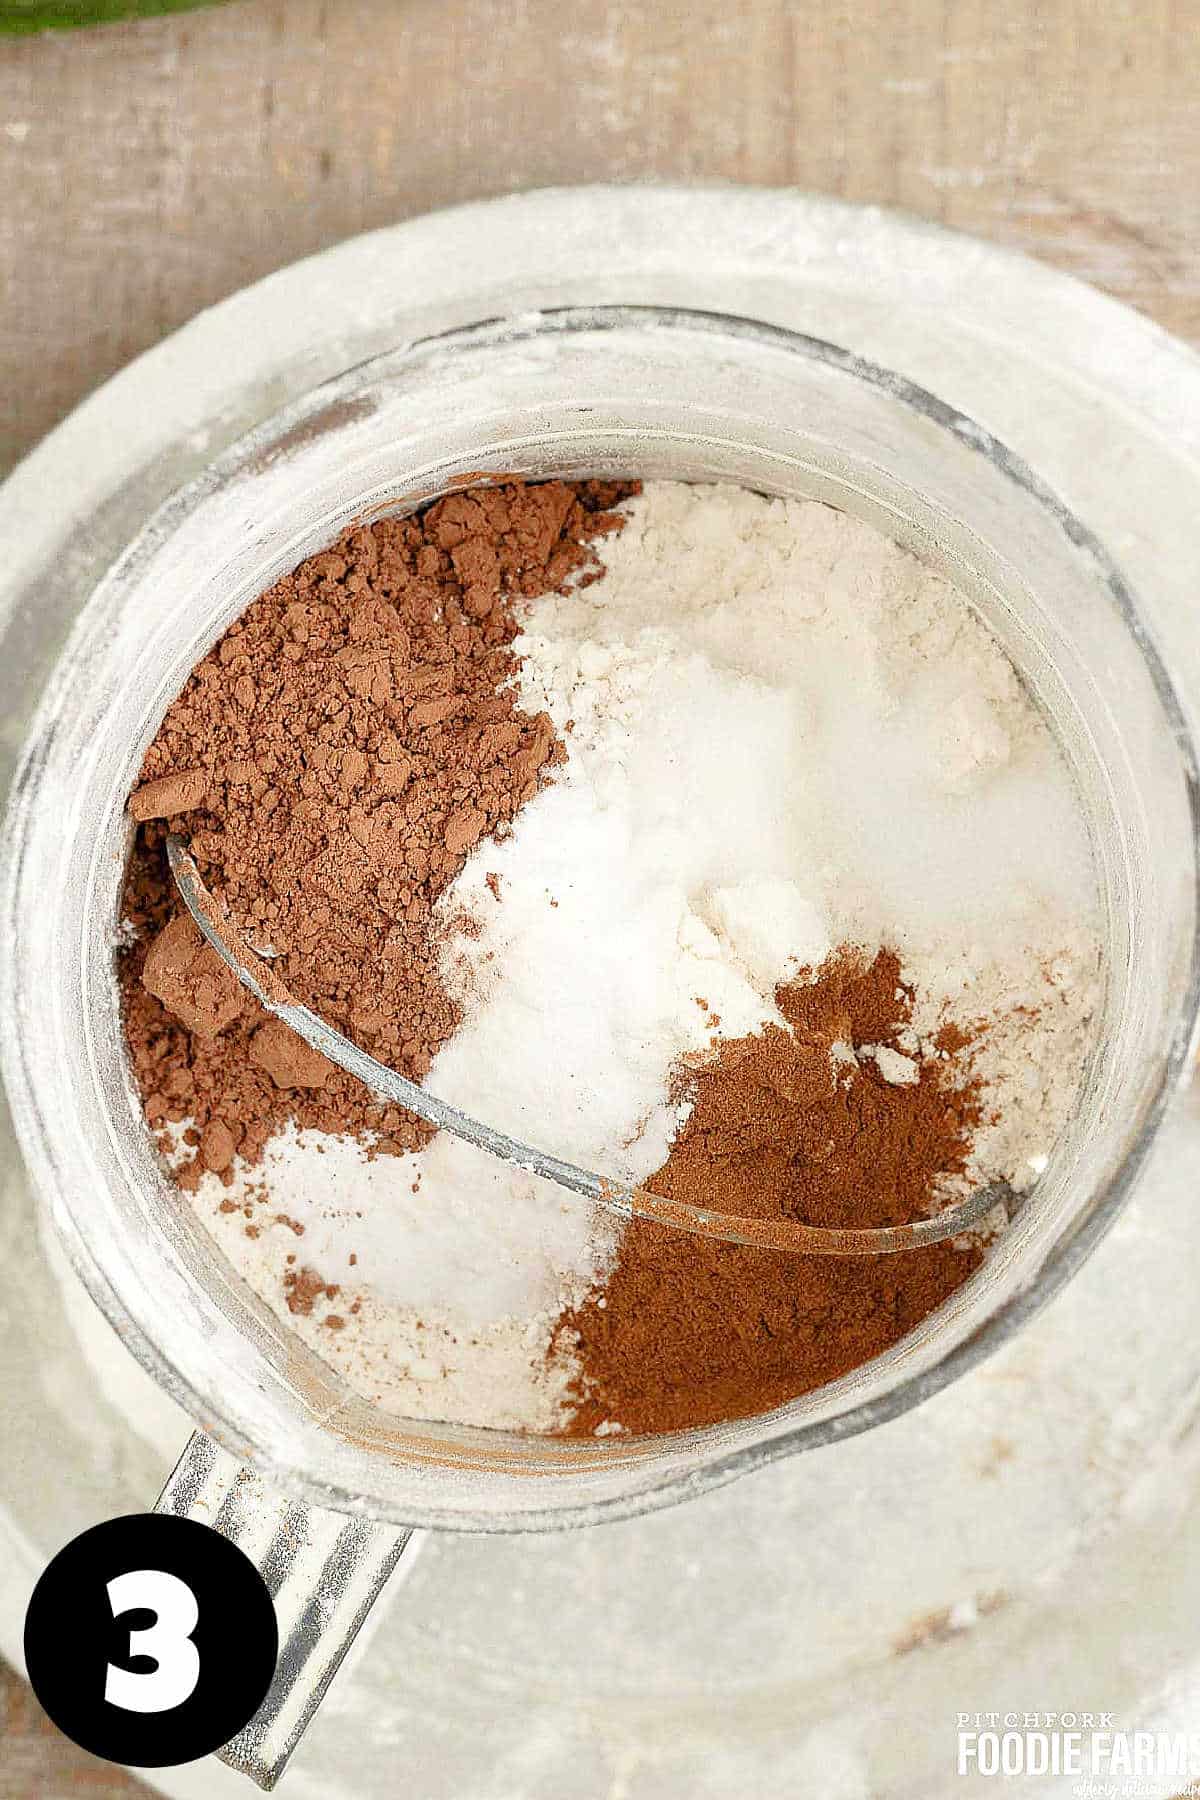 Flour, cocoa, cinnamon and other dry ingredients for making zucchini cake. 